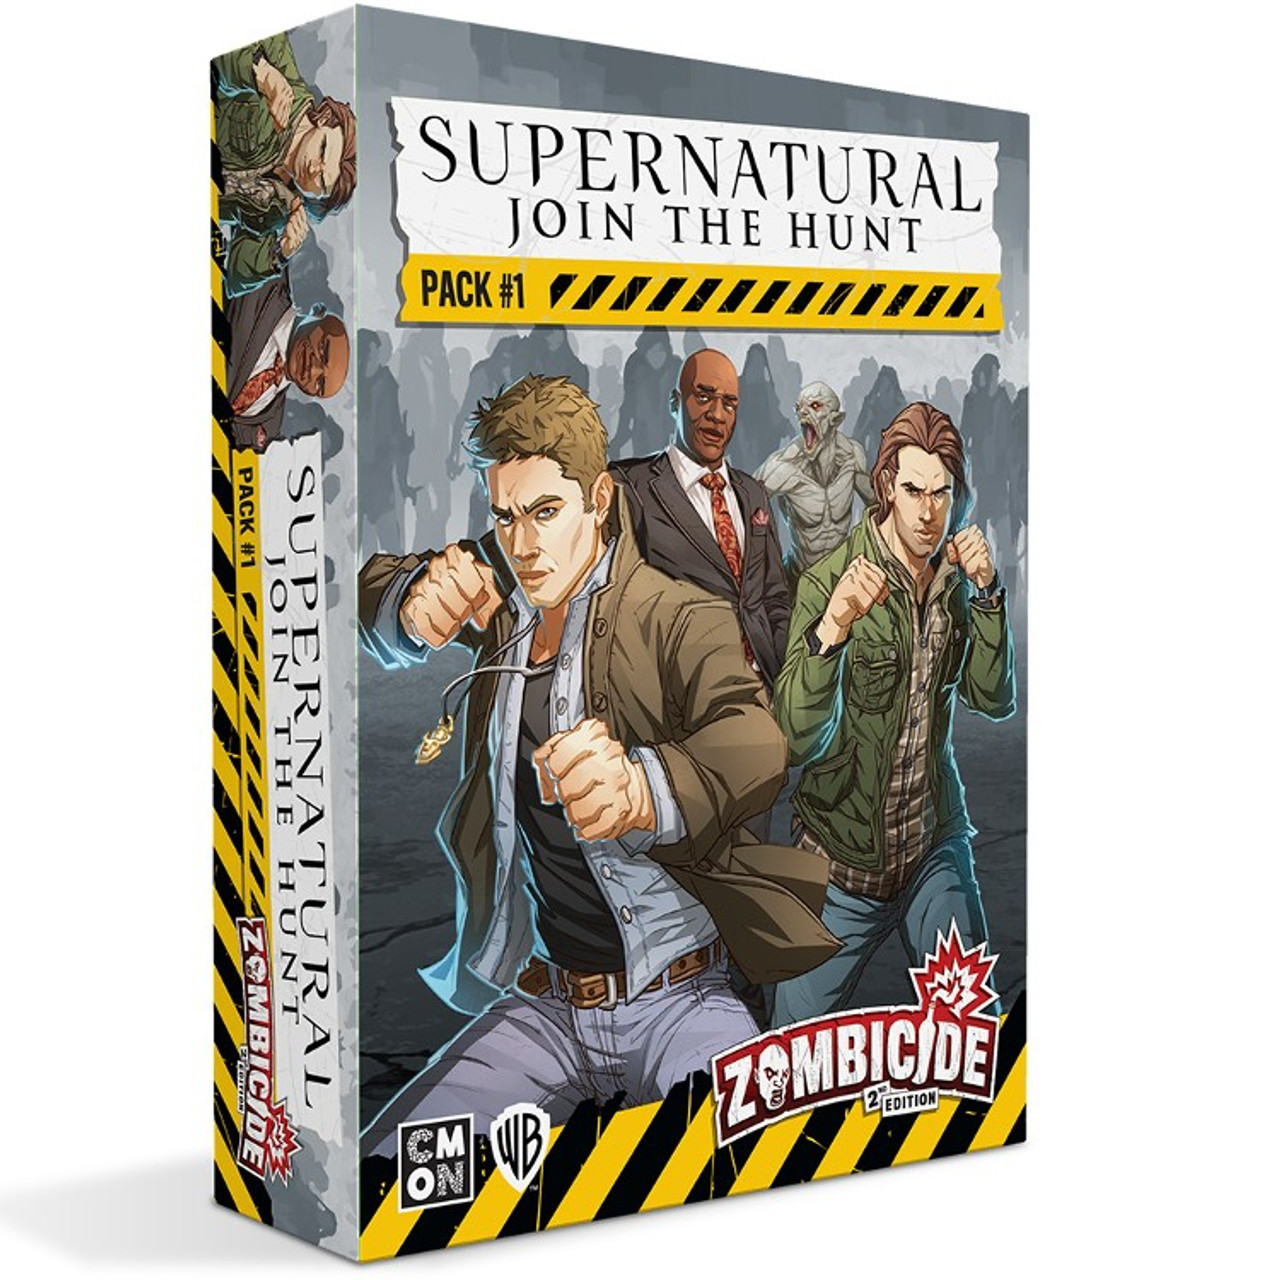 Zombicide 2nd Edition: Supernatural - Join the Hunt - Pack #1